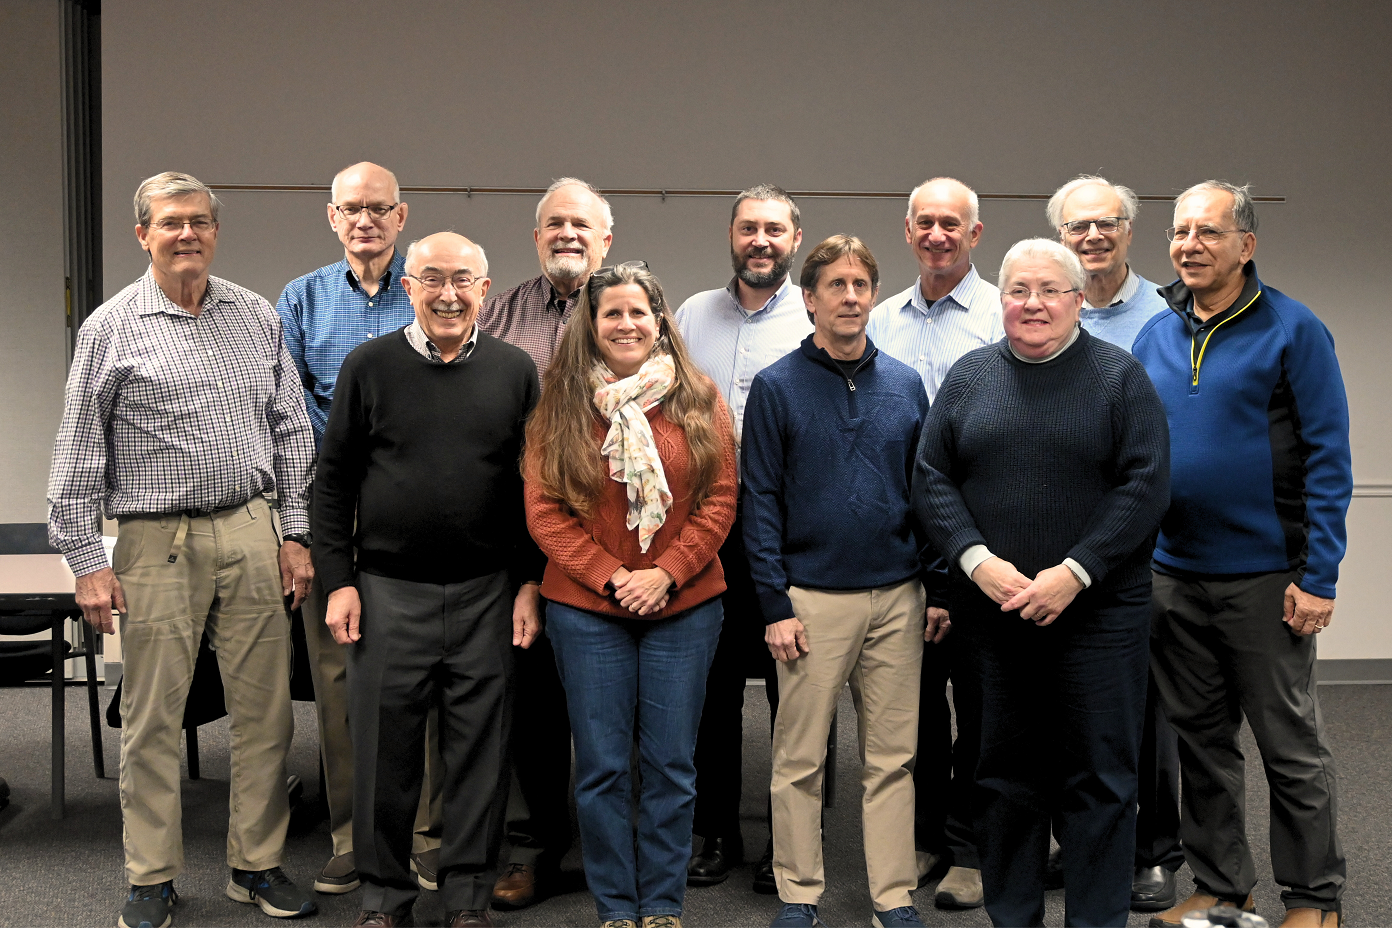 EQAC Members in a group photo